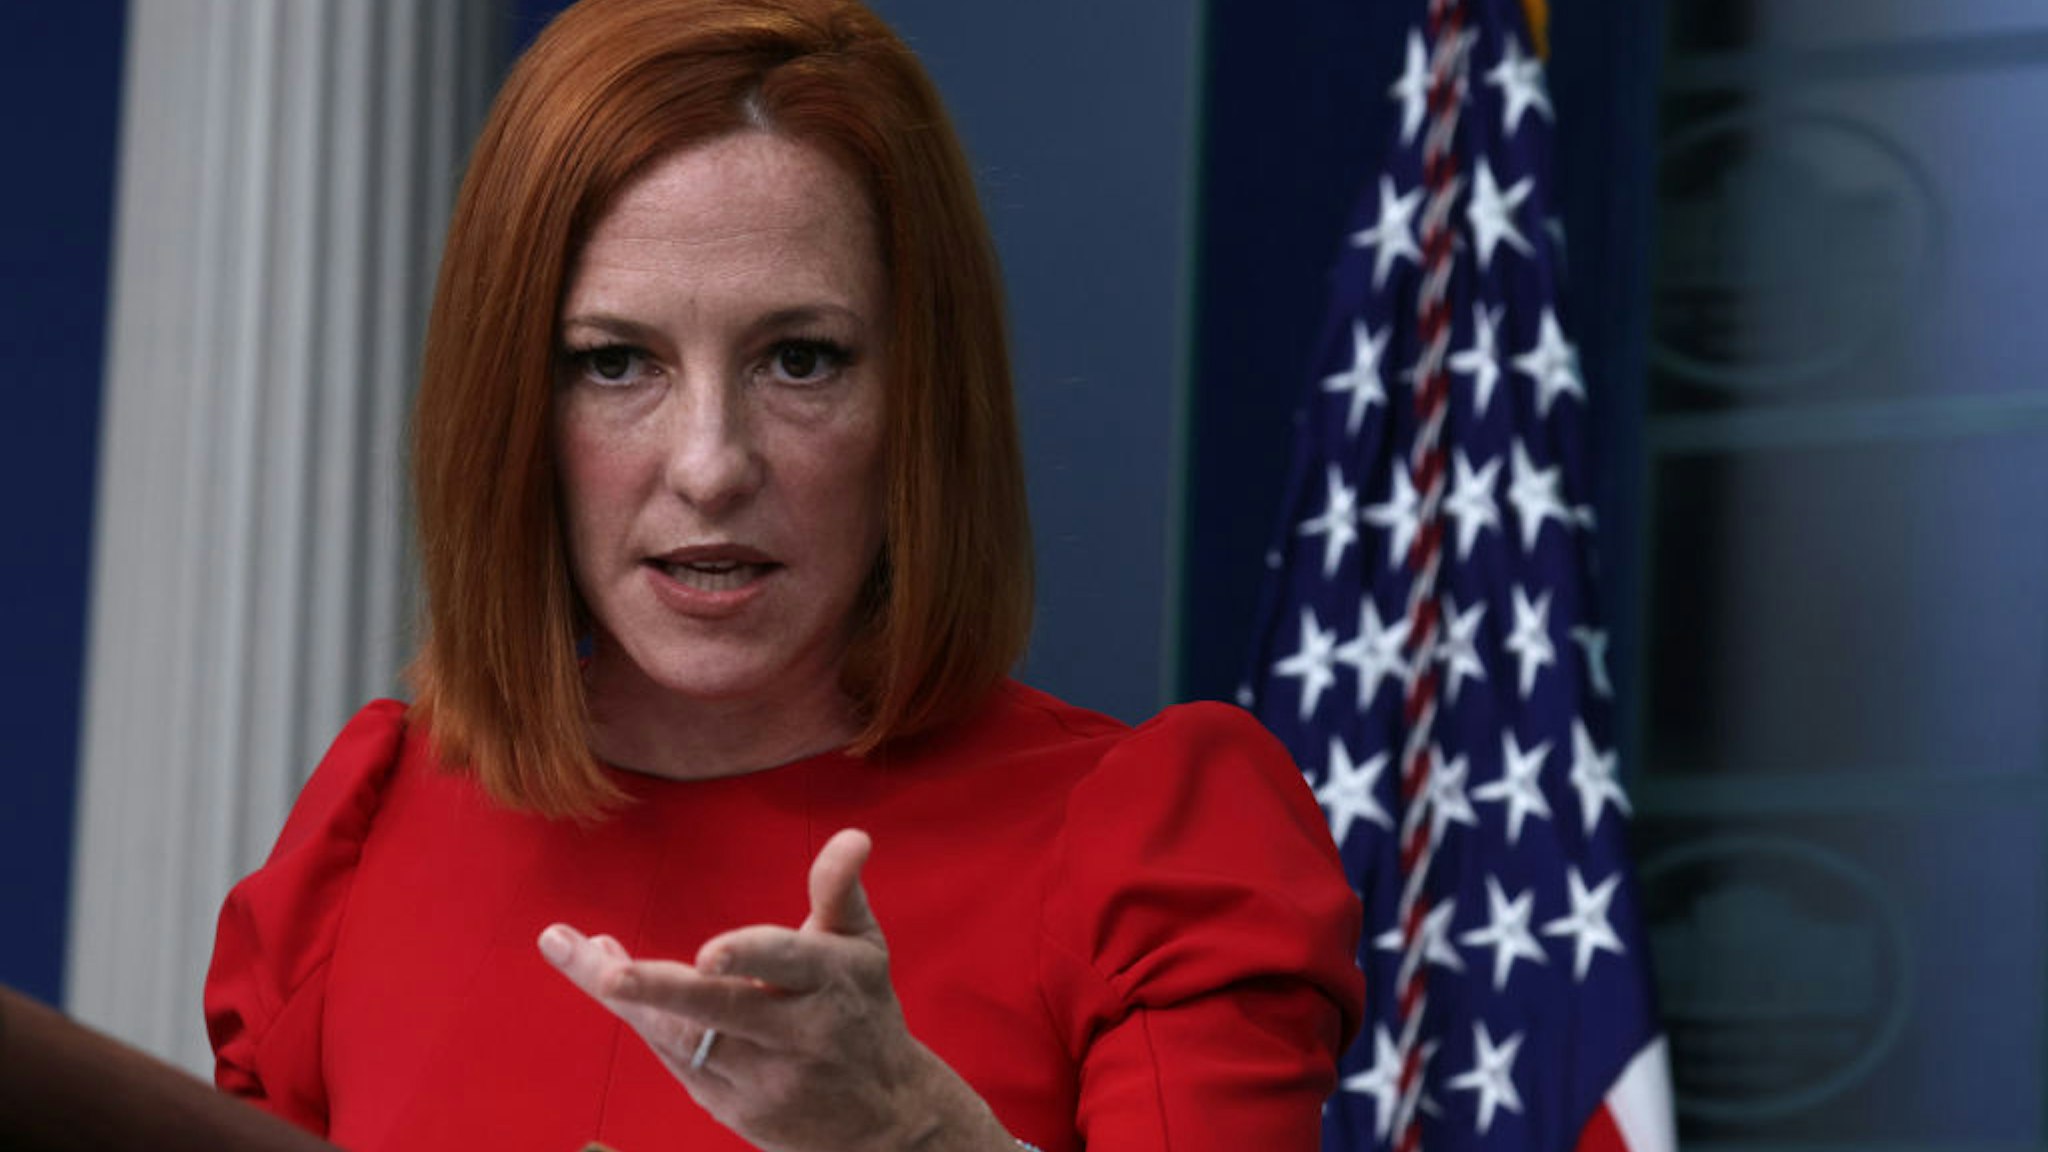 WASHINGTON, DC - MAY 04: White House Press Secretary Jen Psaki speaks during a White House daily press briefing at the James Brady Press Briefing Room at the White House on May 04, 2022 in Washington, DC. Psaki held a daily press briefing to answer questions from members of the press. (Photo by Alex Wong/Getty Images)